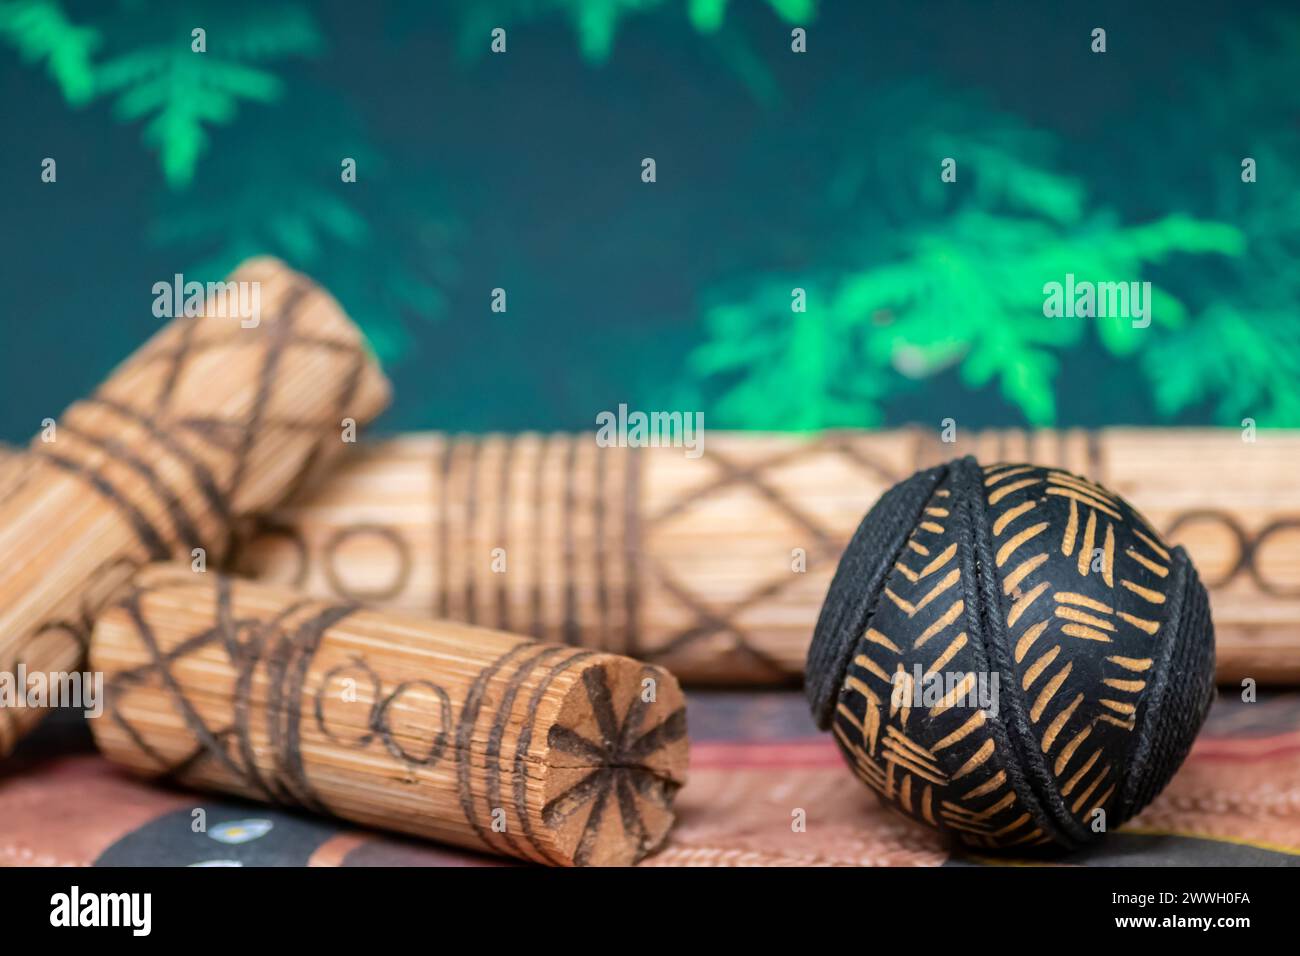 Musical traditional ethnical and tribal rhythmic idiophones made of wood with some grains or send inside, when shacked makes nice sound Stock Photo